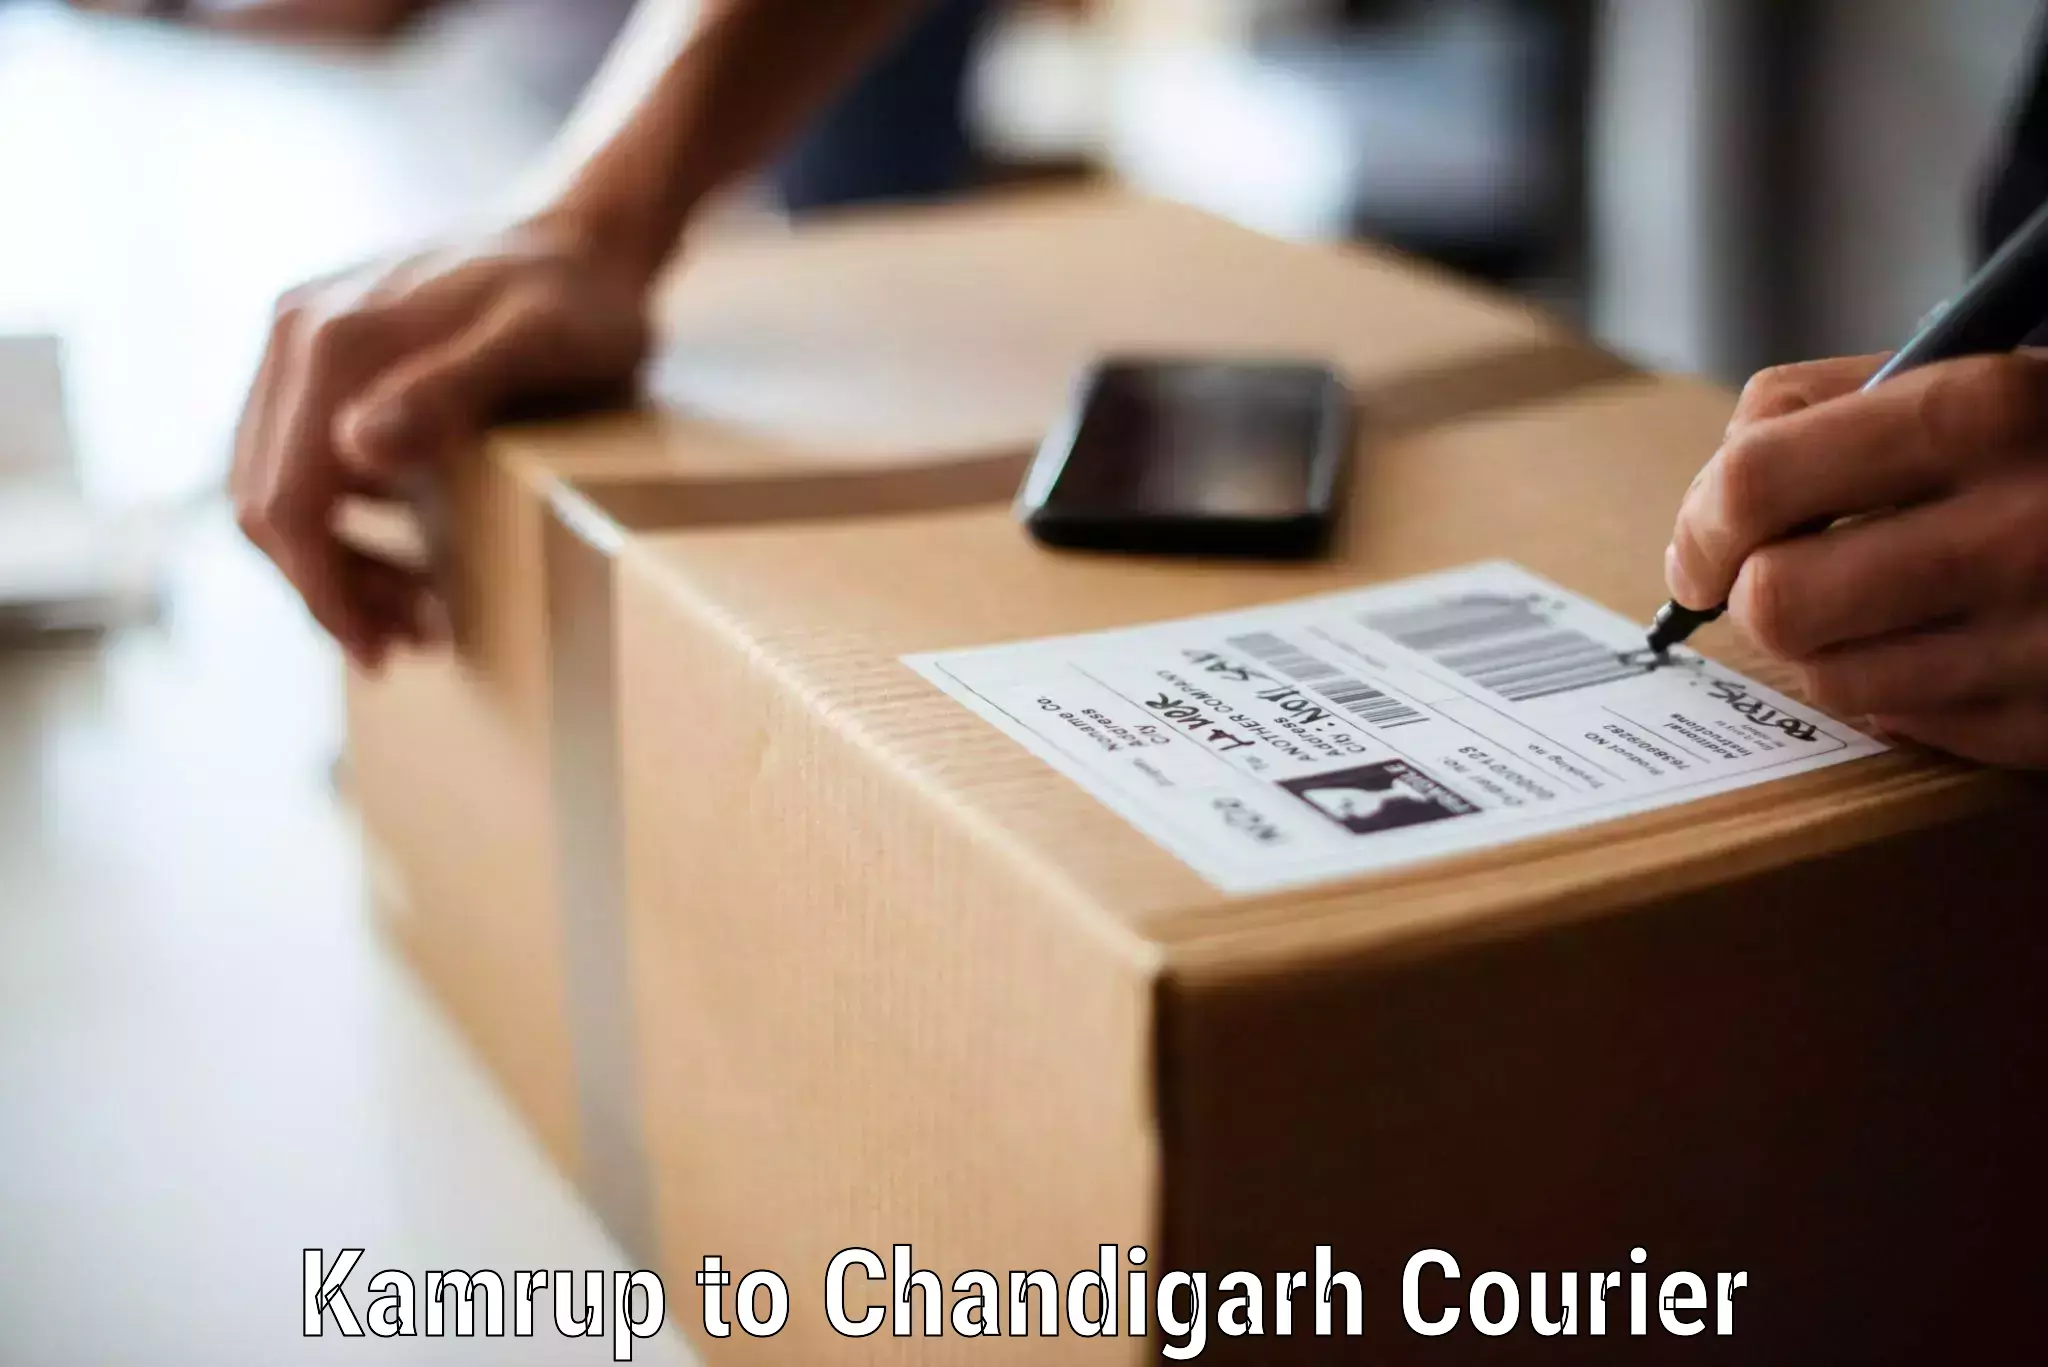 Furniture transport specialists Kamrup to Chandigarh